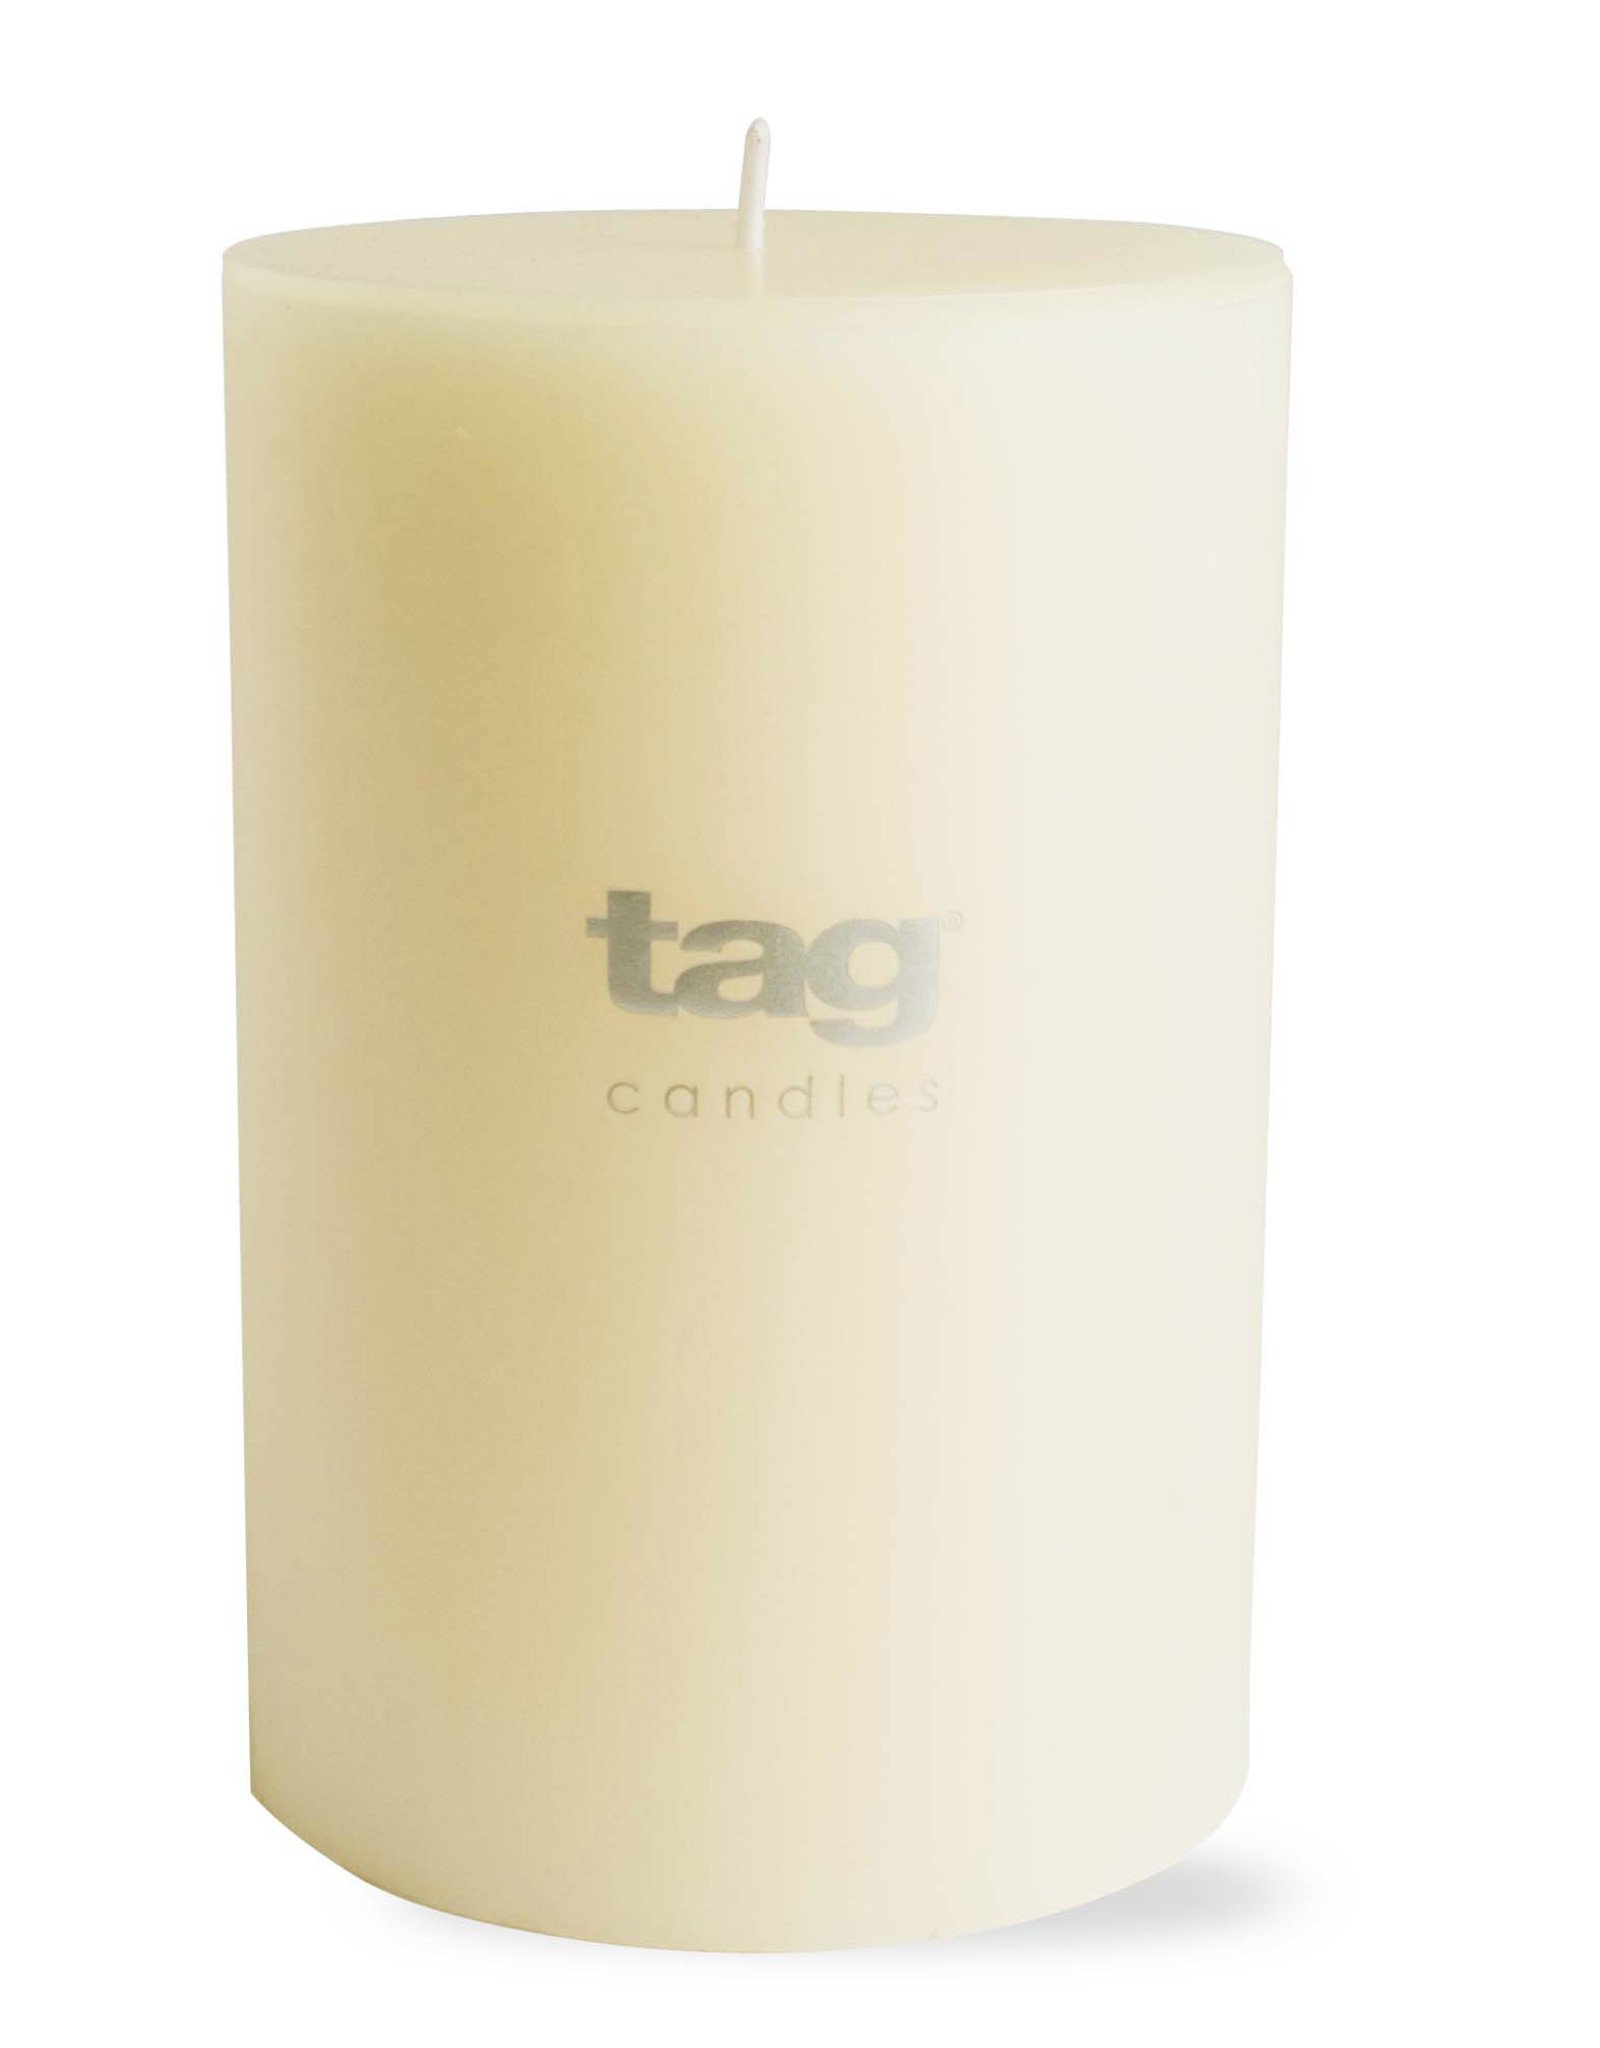 Pillar Candle Unscented Ivory White 4x6"